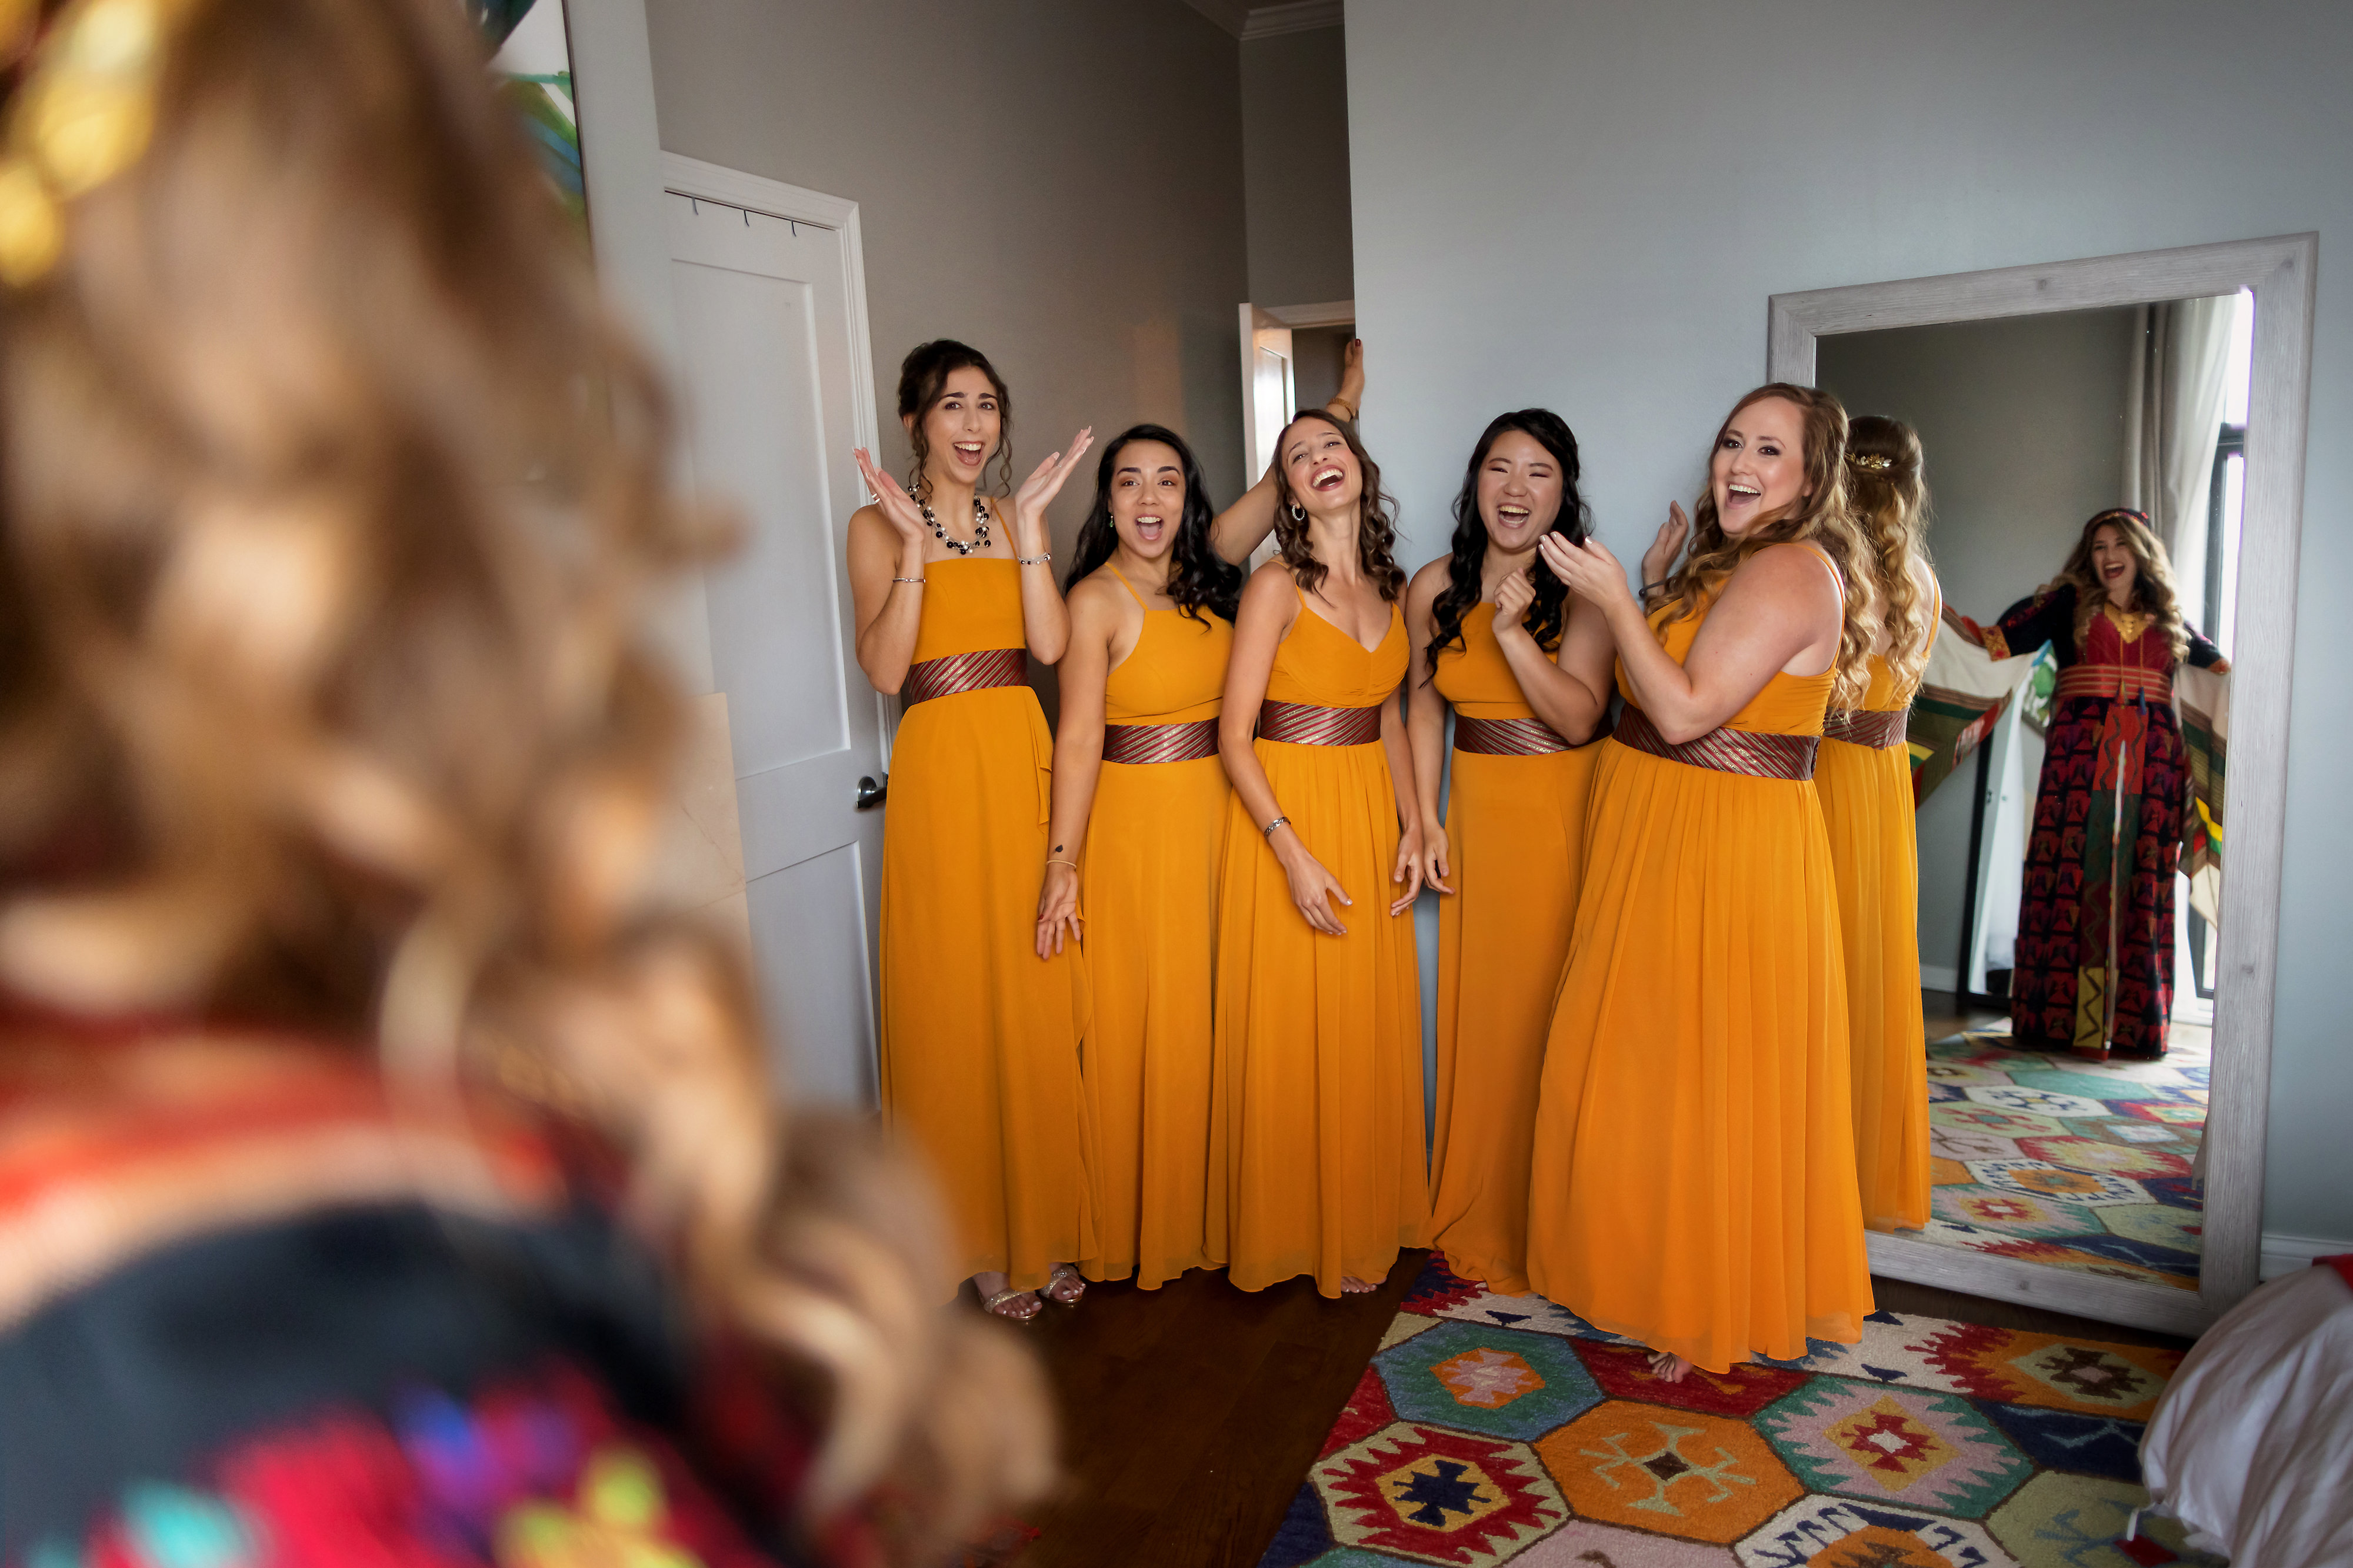 Bridesmaids react to seeing bride in traditional Palestinian wedding dress